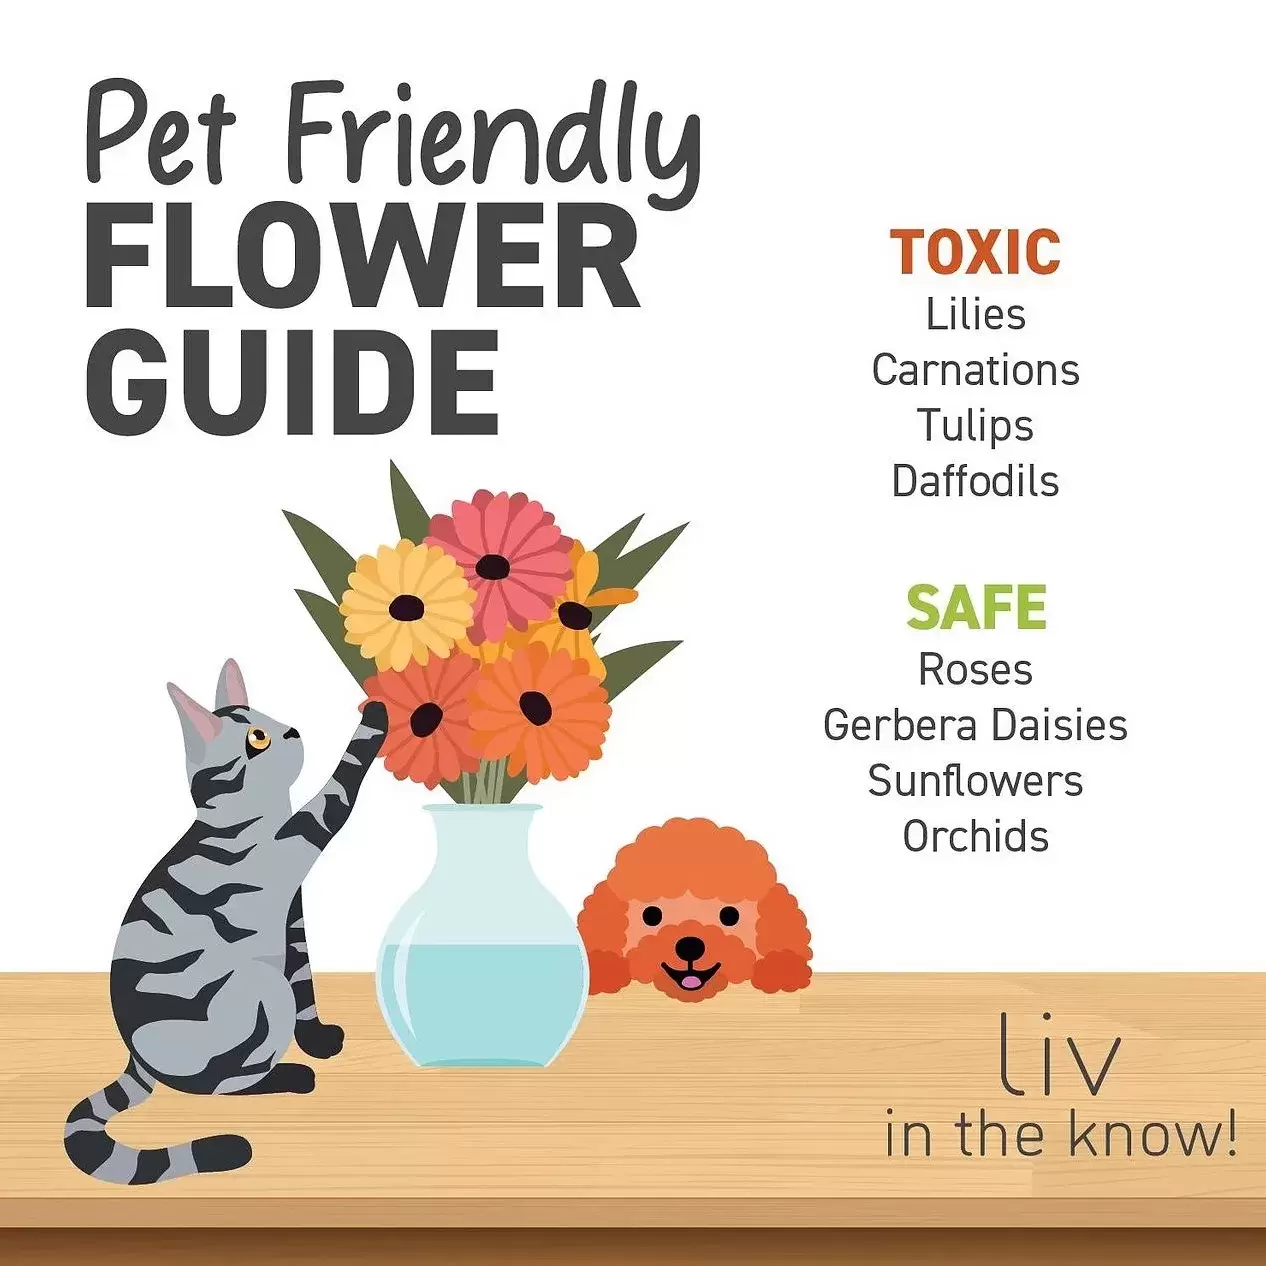 Love is in the air 💘 make sure you know which flowers are safe for your fur babies! #livintheknow #petsafeplants #seasonoflove